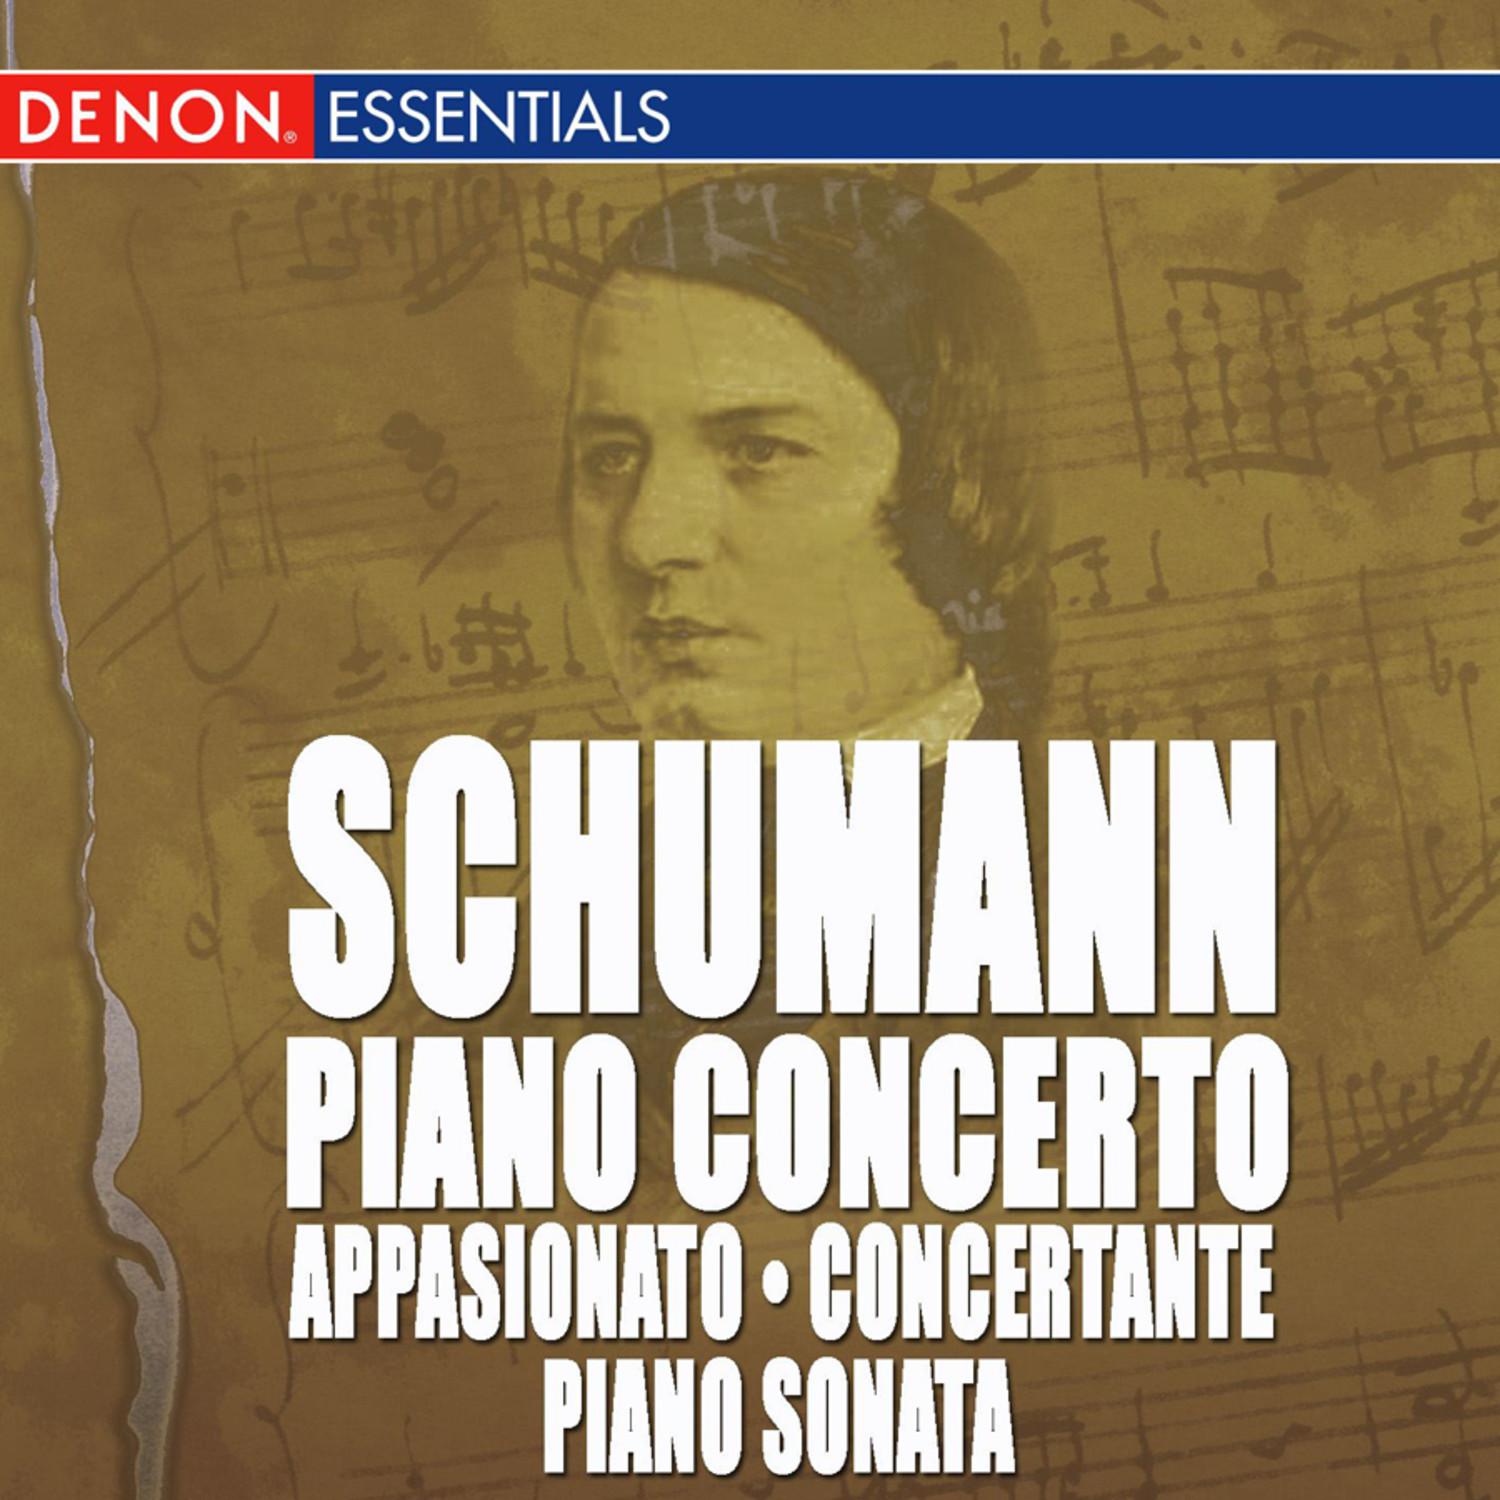 Schumann: Piano Concerto - Introduction and Allegro Appasionato - Introduction and Allegro Concertante - Sonata for Piano, Op. 14